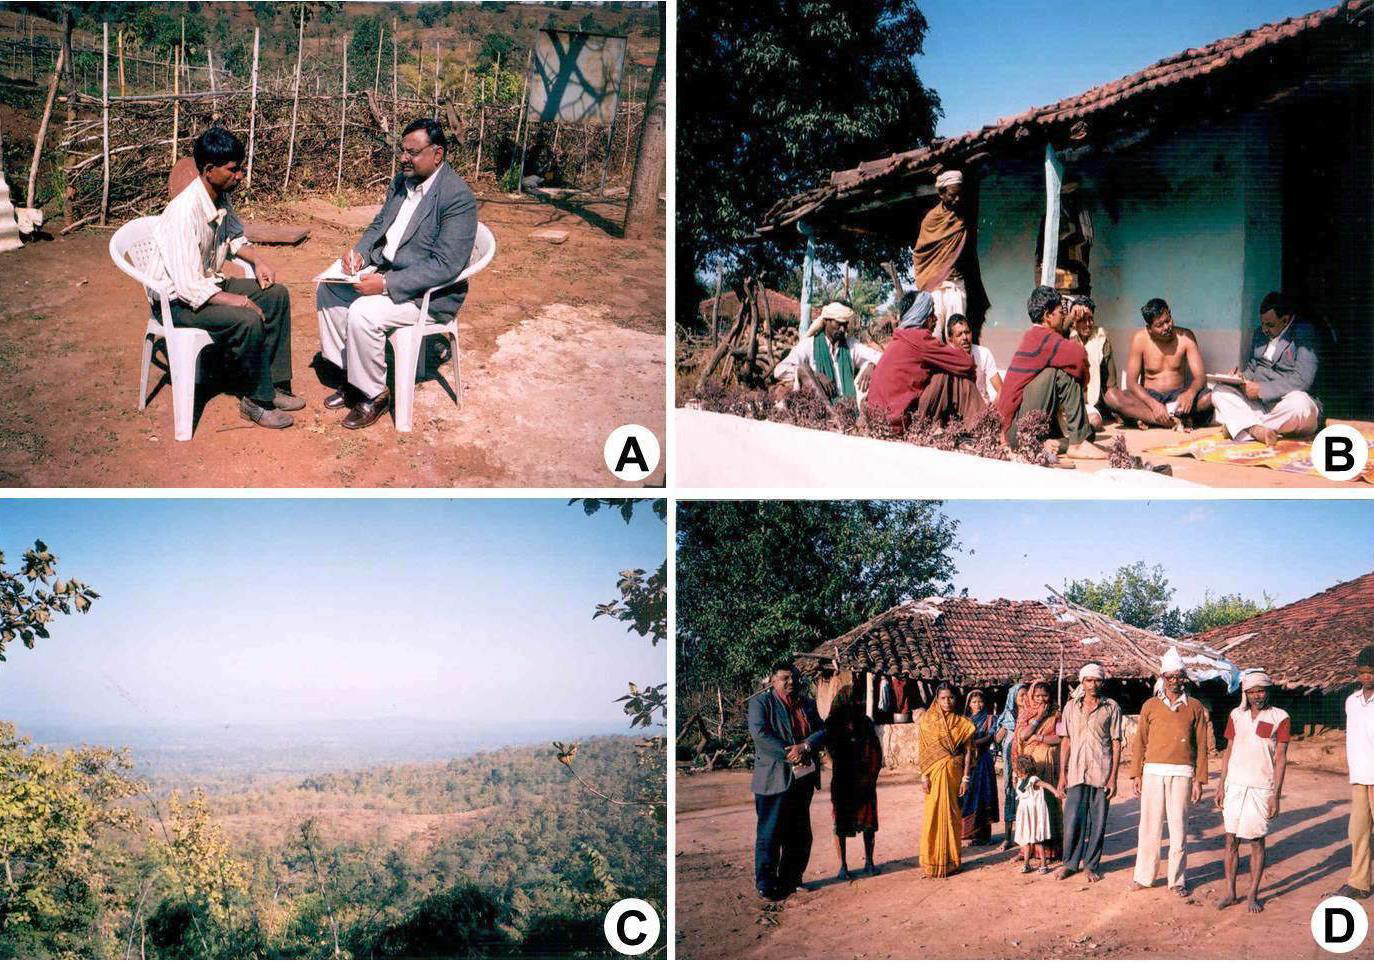 A, Interviewing a traditional healer; B, Interviewing Korku Tribal community; C, A view of forest; D, A family of Bhatra tribe in Chhattisgarh.